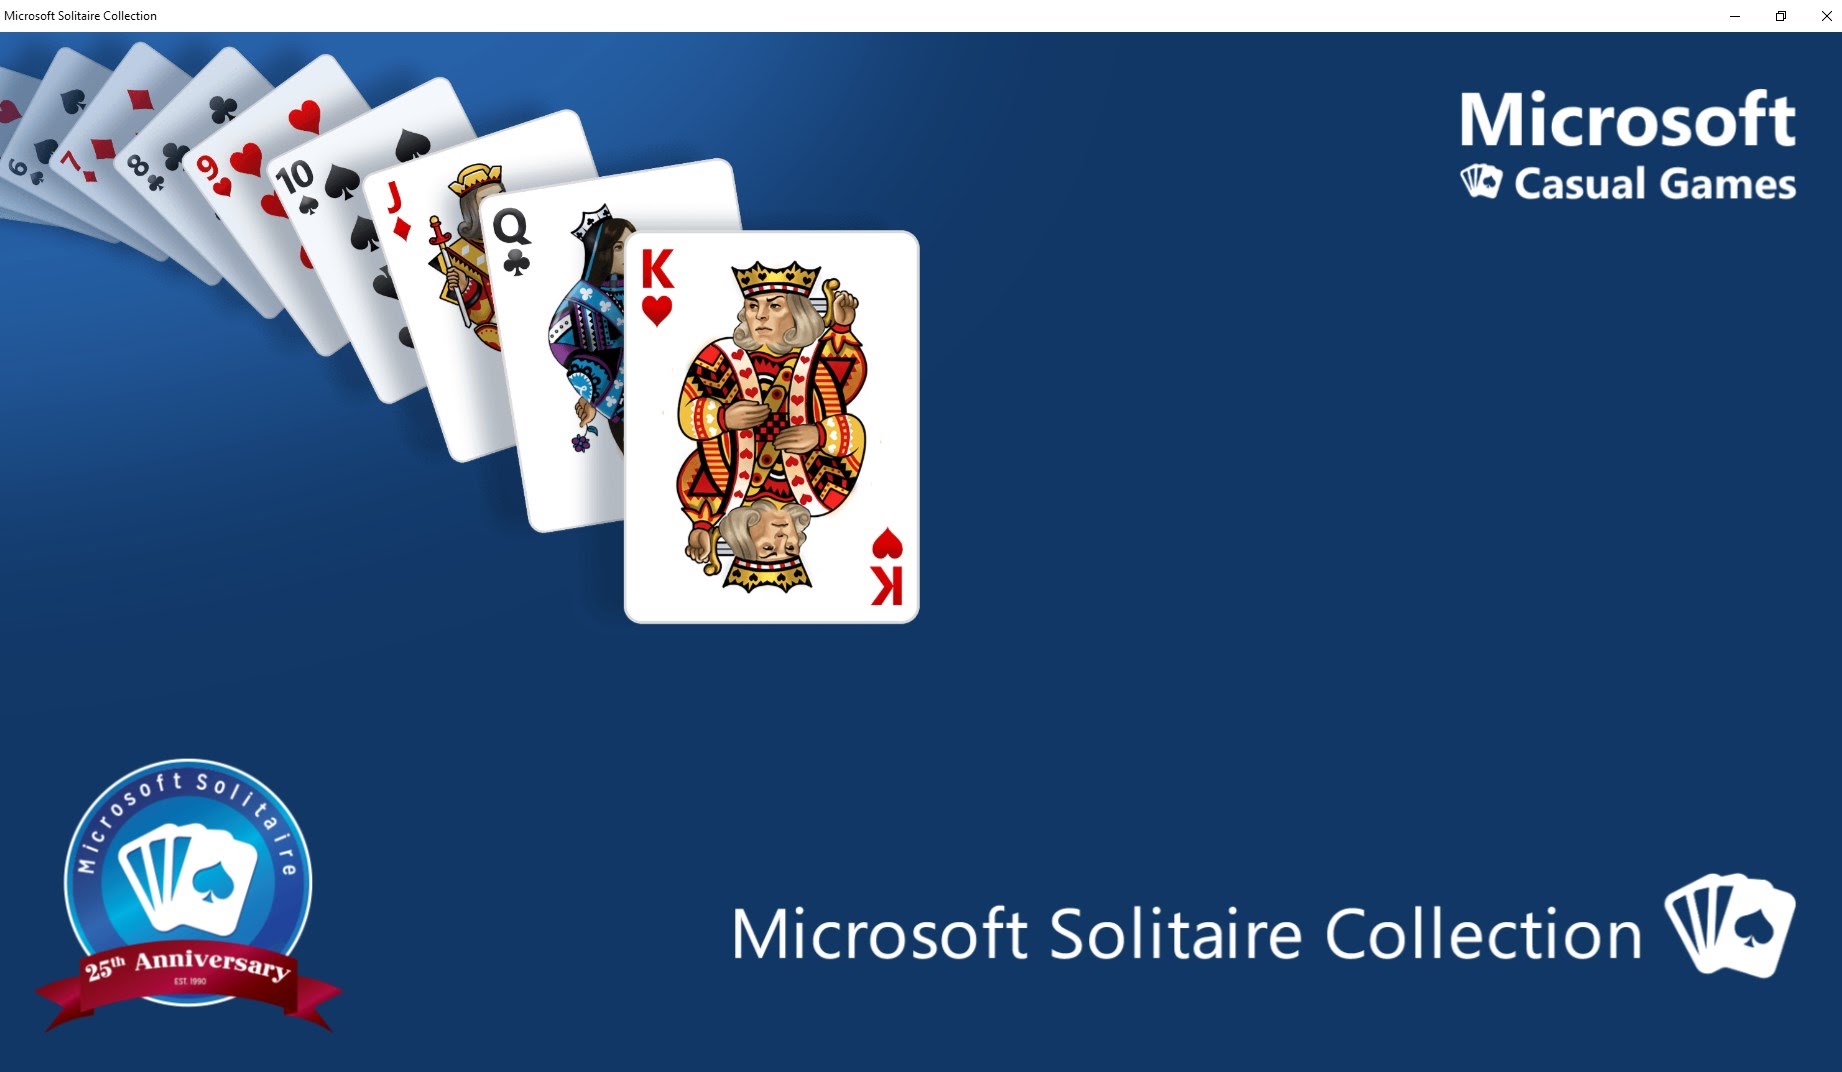 download the last version for windows Solitaire - Casual Collection